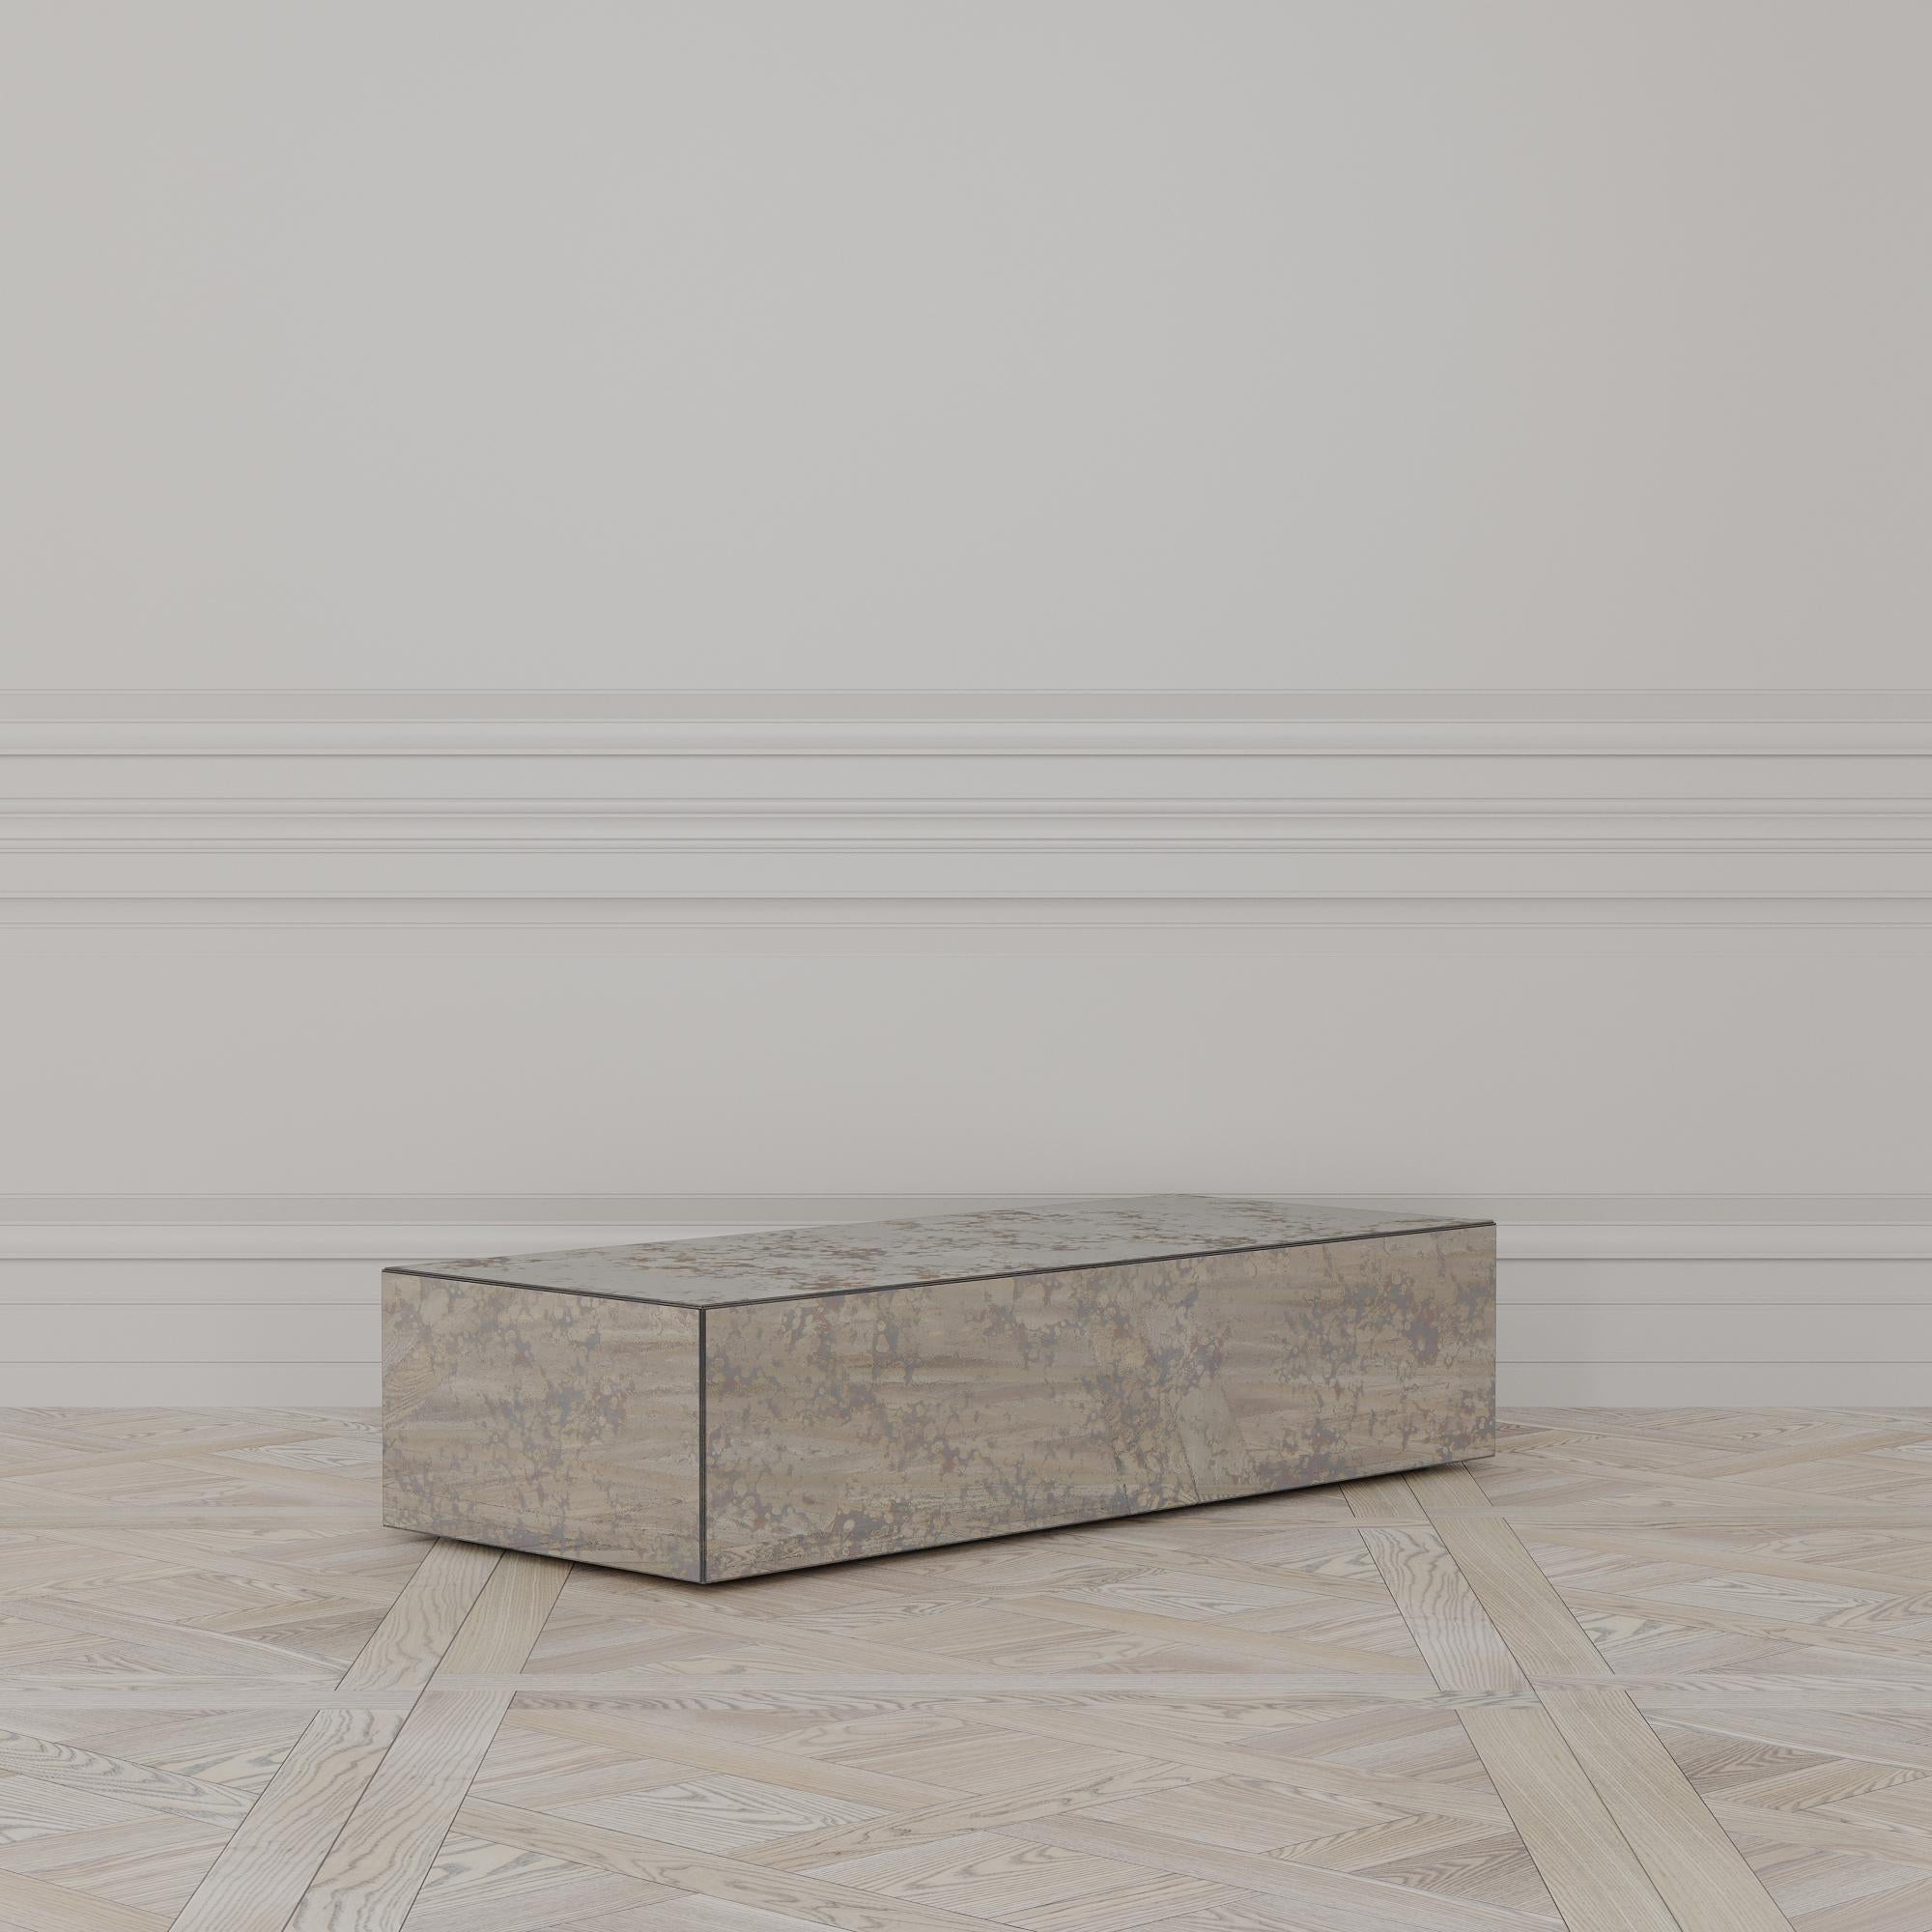 The Lasthour coffee table is designed by Emél & Browne in the Minimalist and contemporary style and custom made in Italy by skilled artisans. Designed by Emél & Browne in Notting Hill London, the Lasthour coffee table embodies the essence of nature